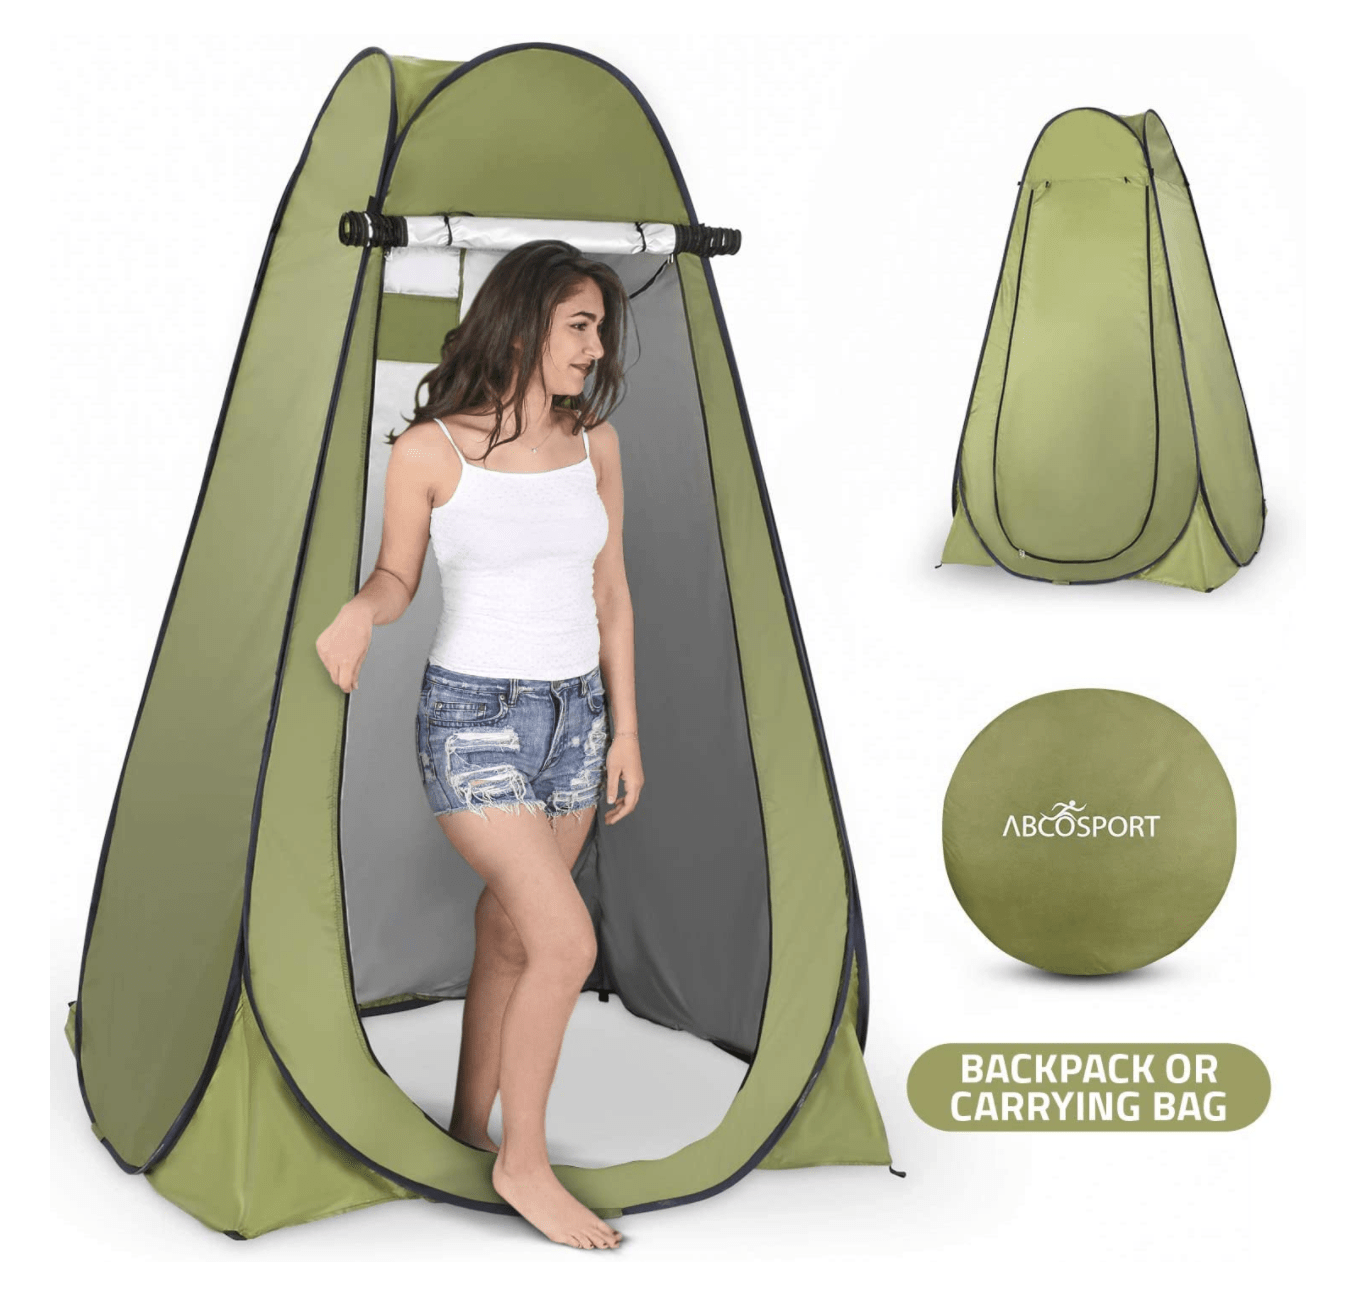 Popup privacy tent